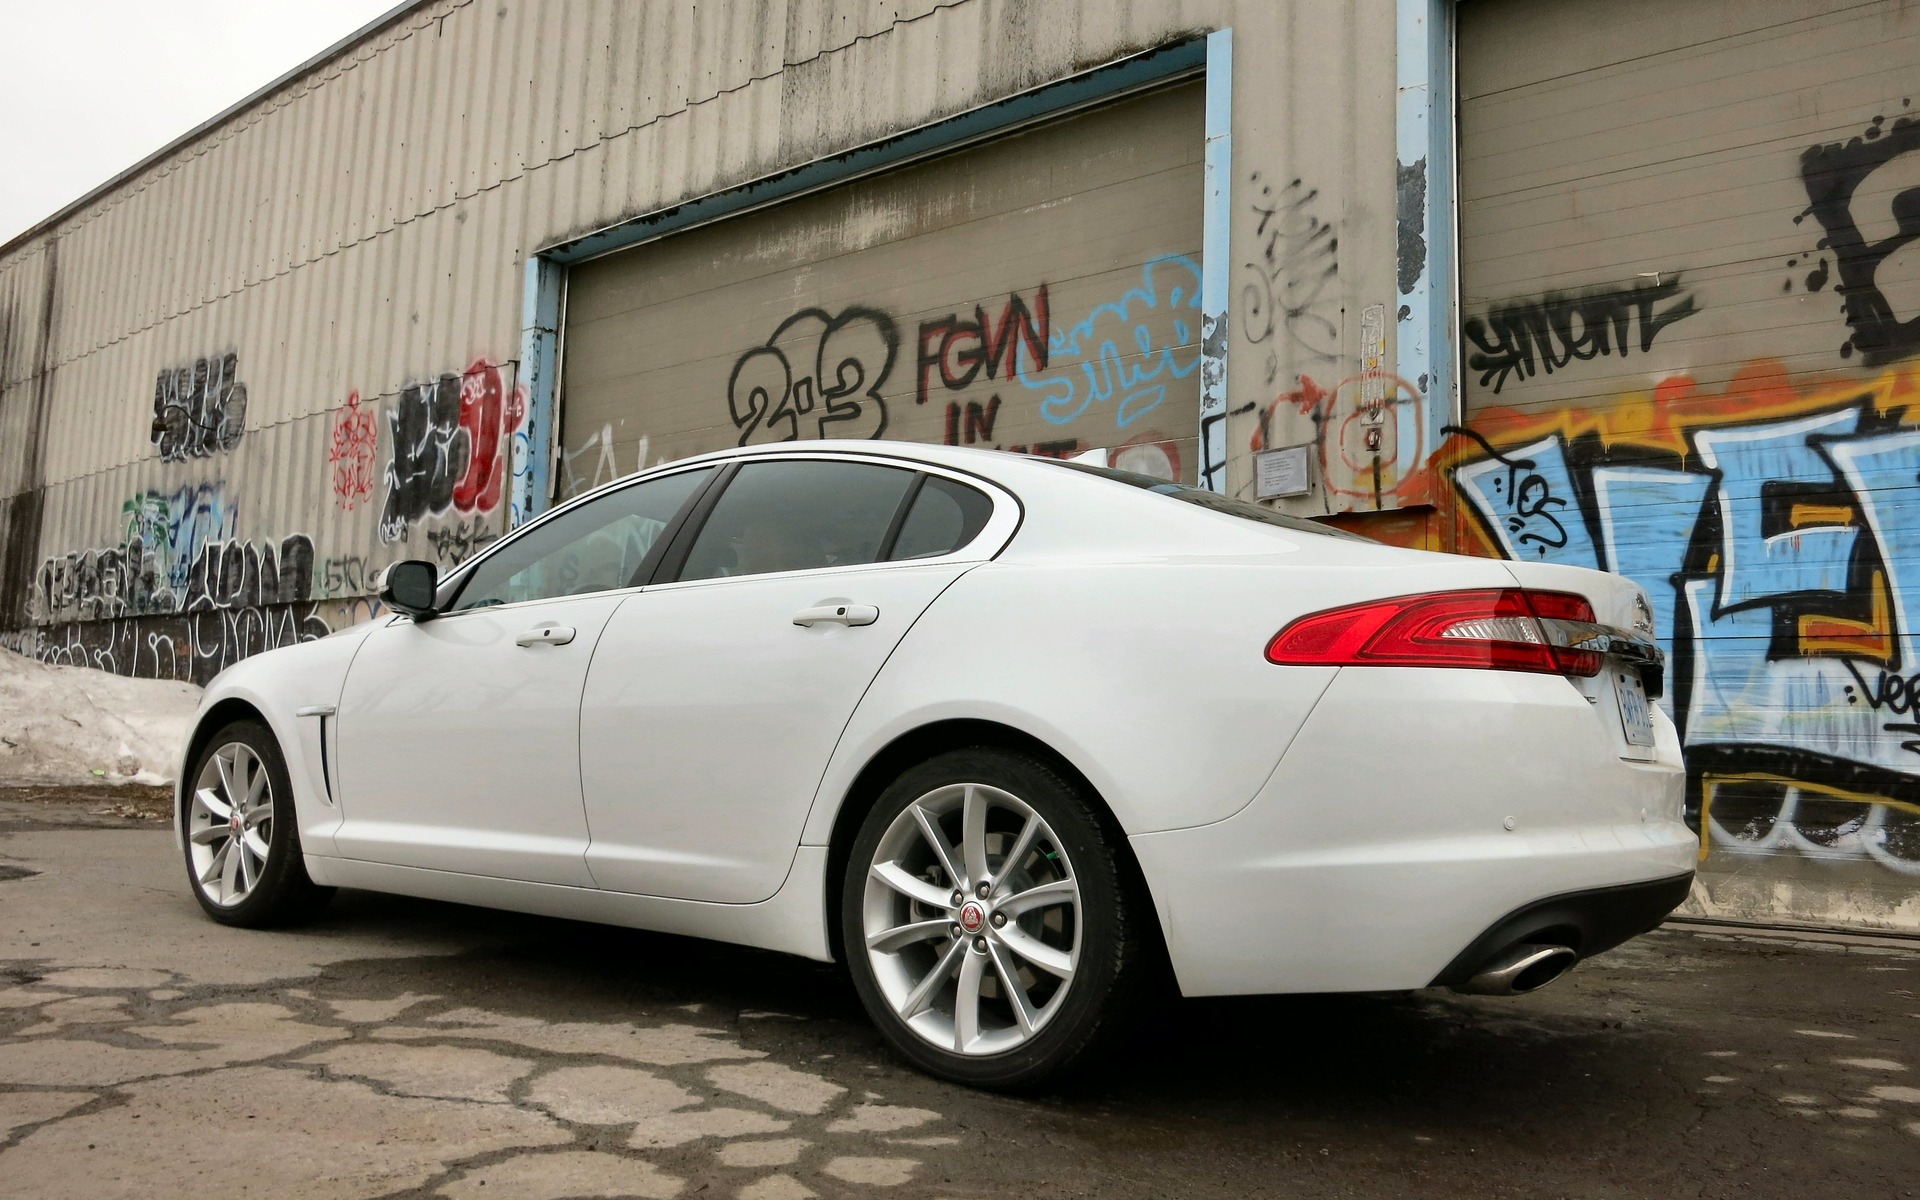 The Jaguar XF won't be for everyone, but that's exactly the point.